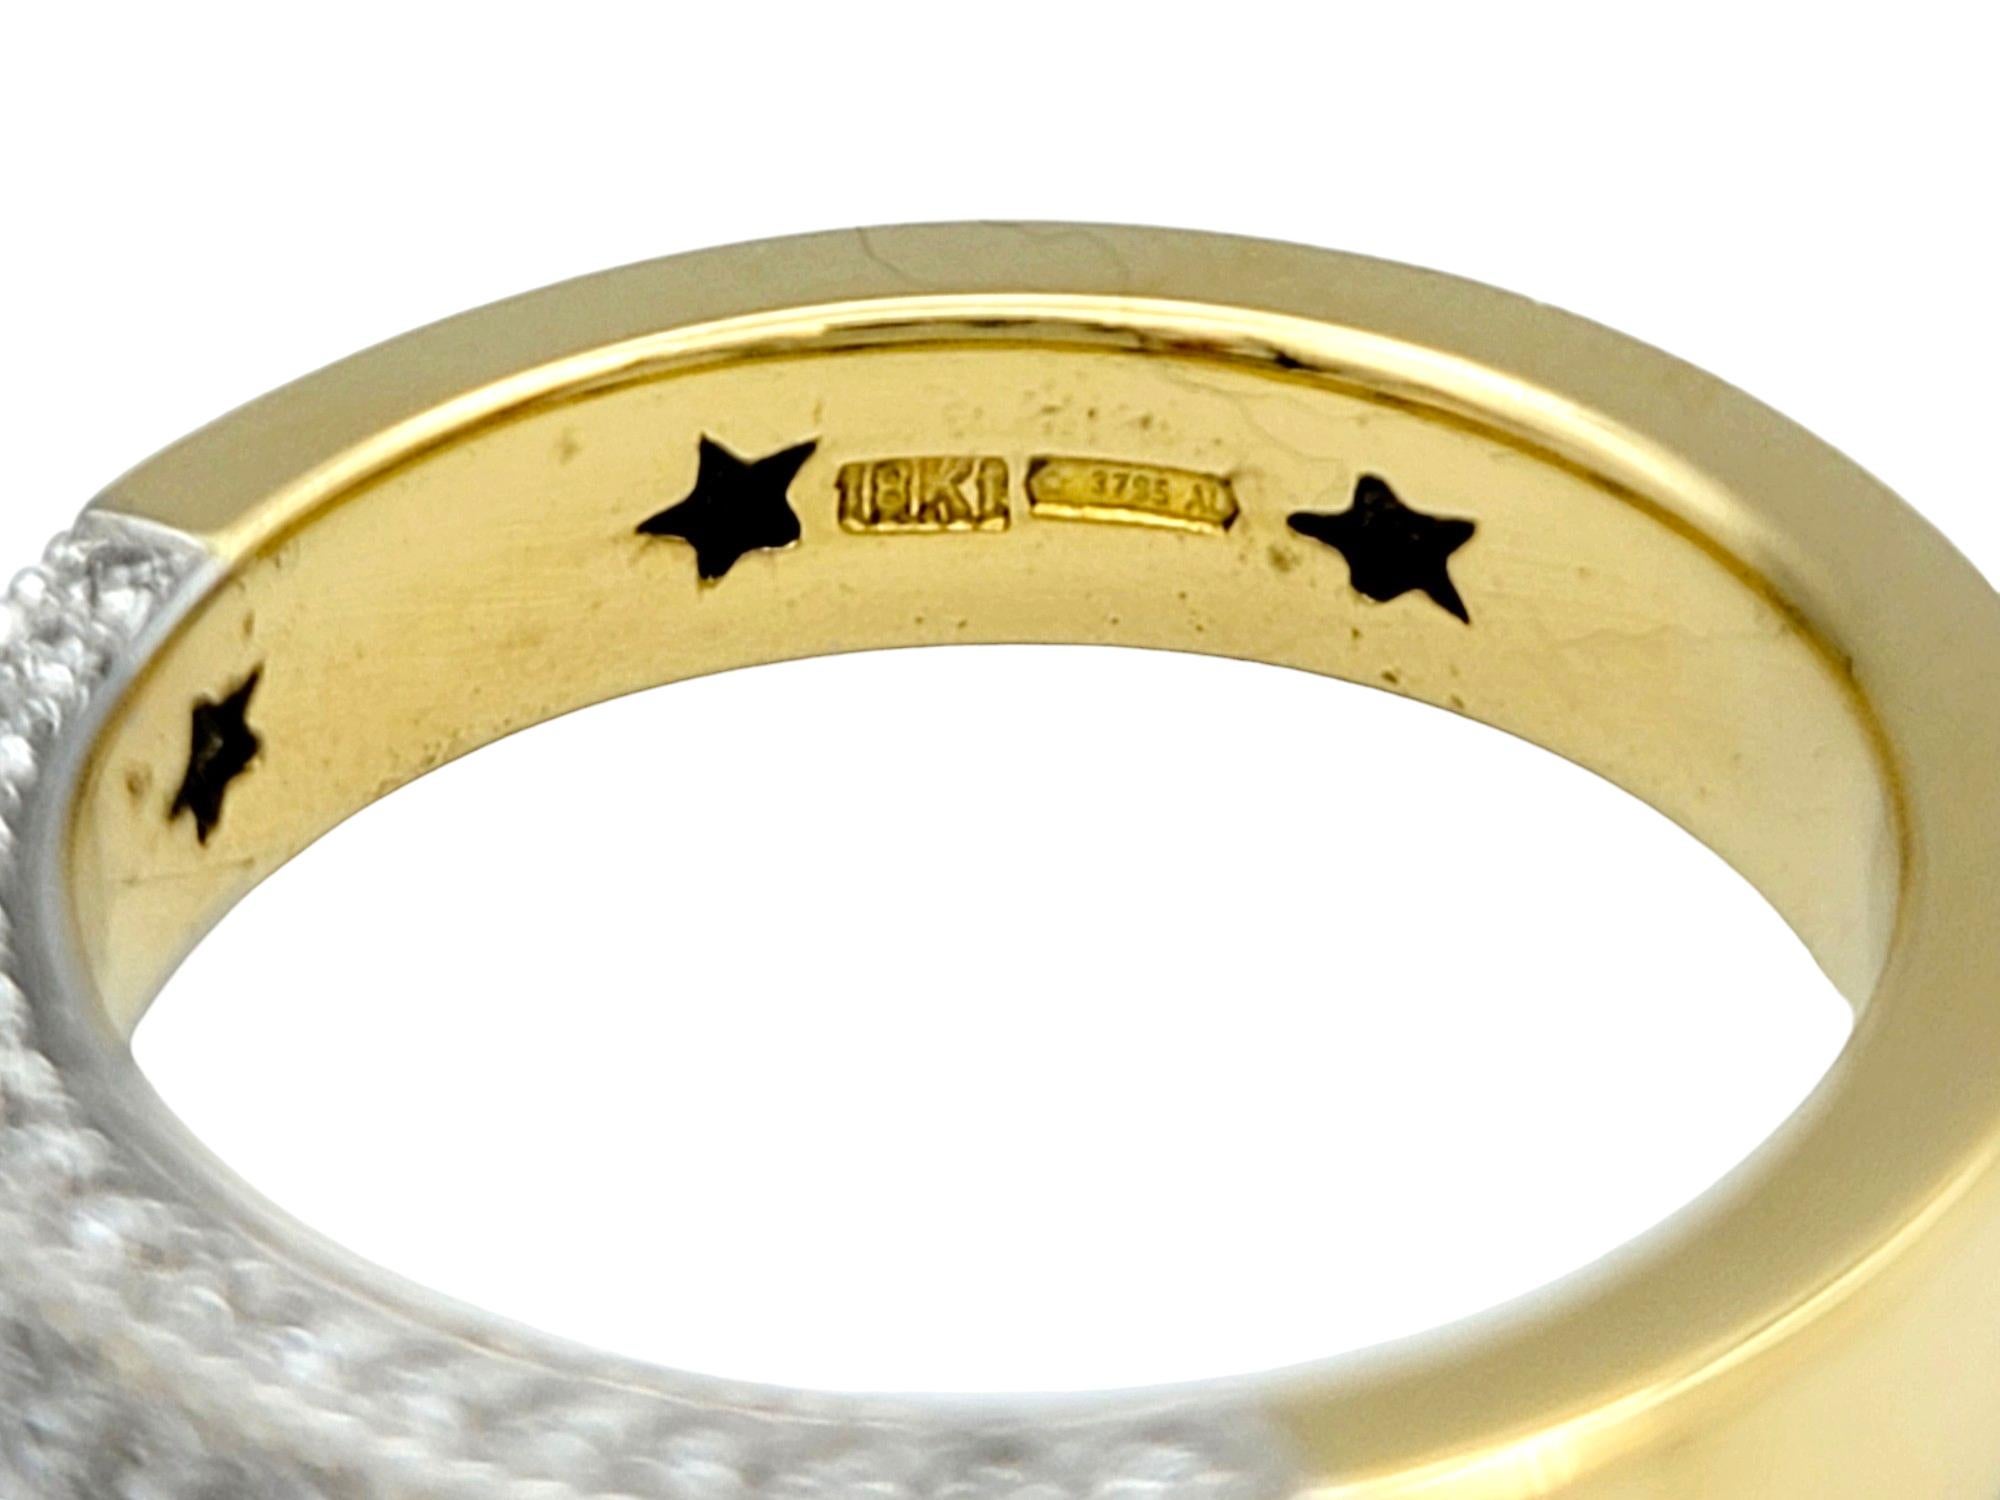 H. Stern Triple Row Diamond Band Ring with Star Designs in 18 Karat Yellow Gold For Sale 4